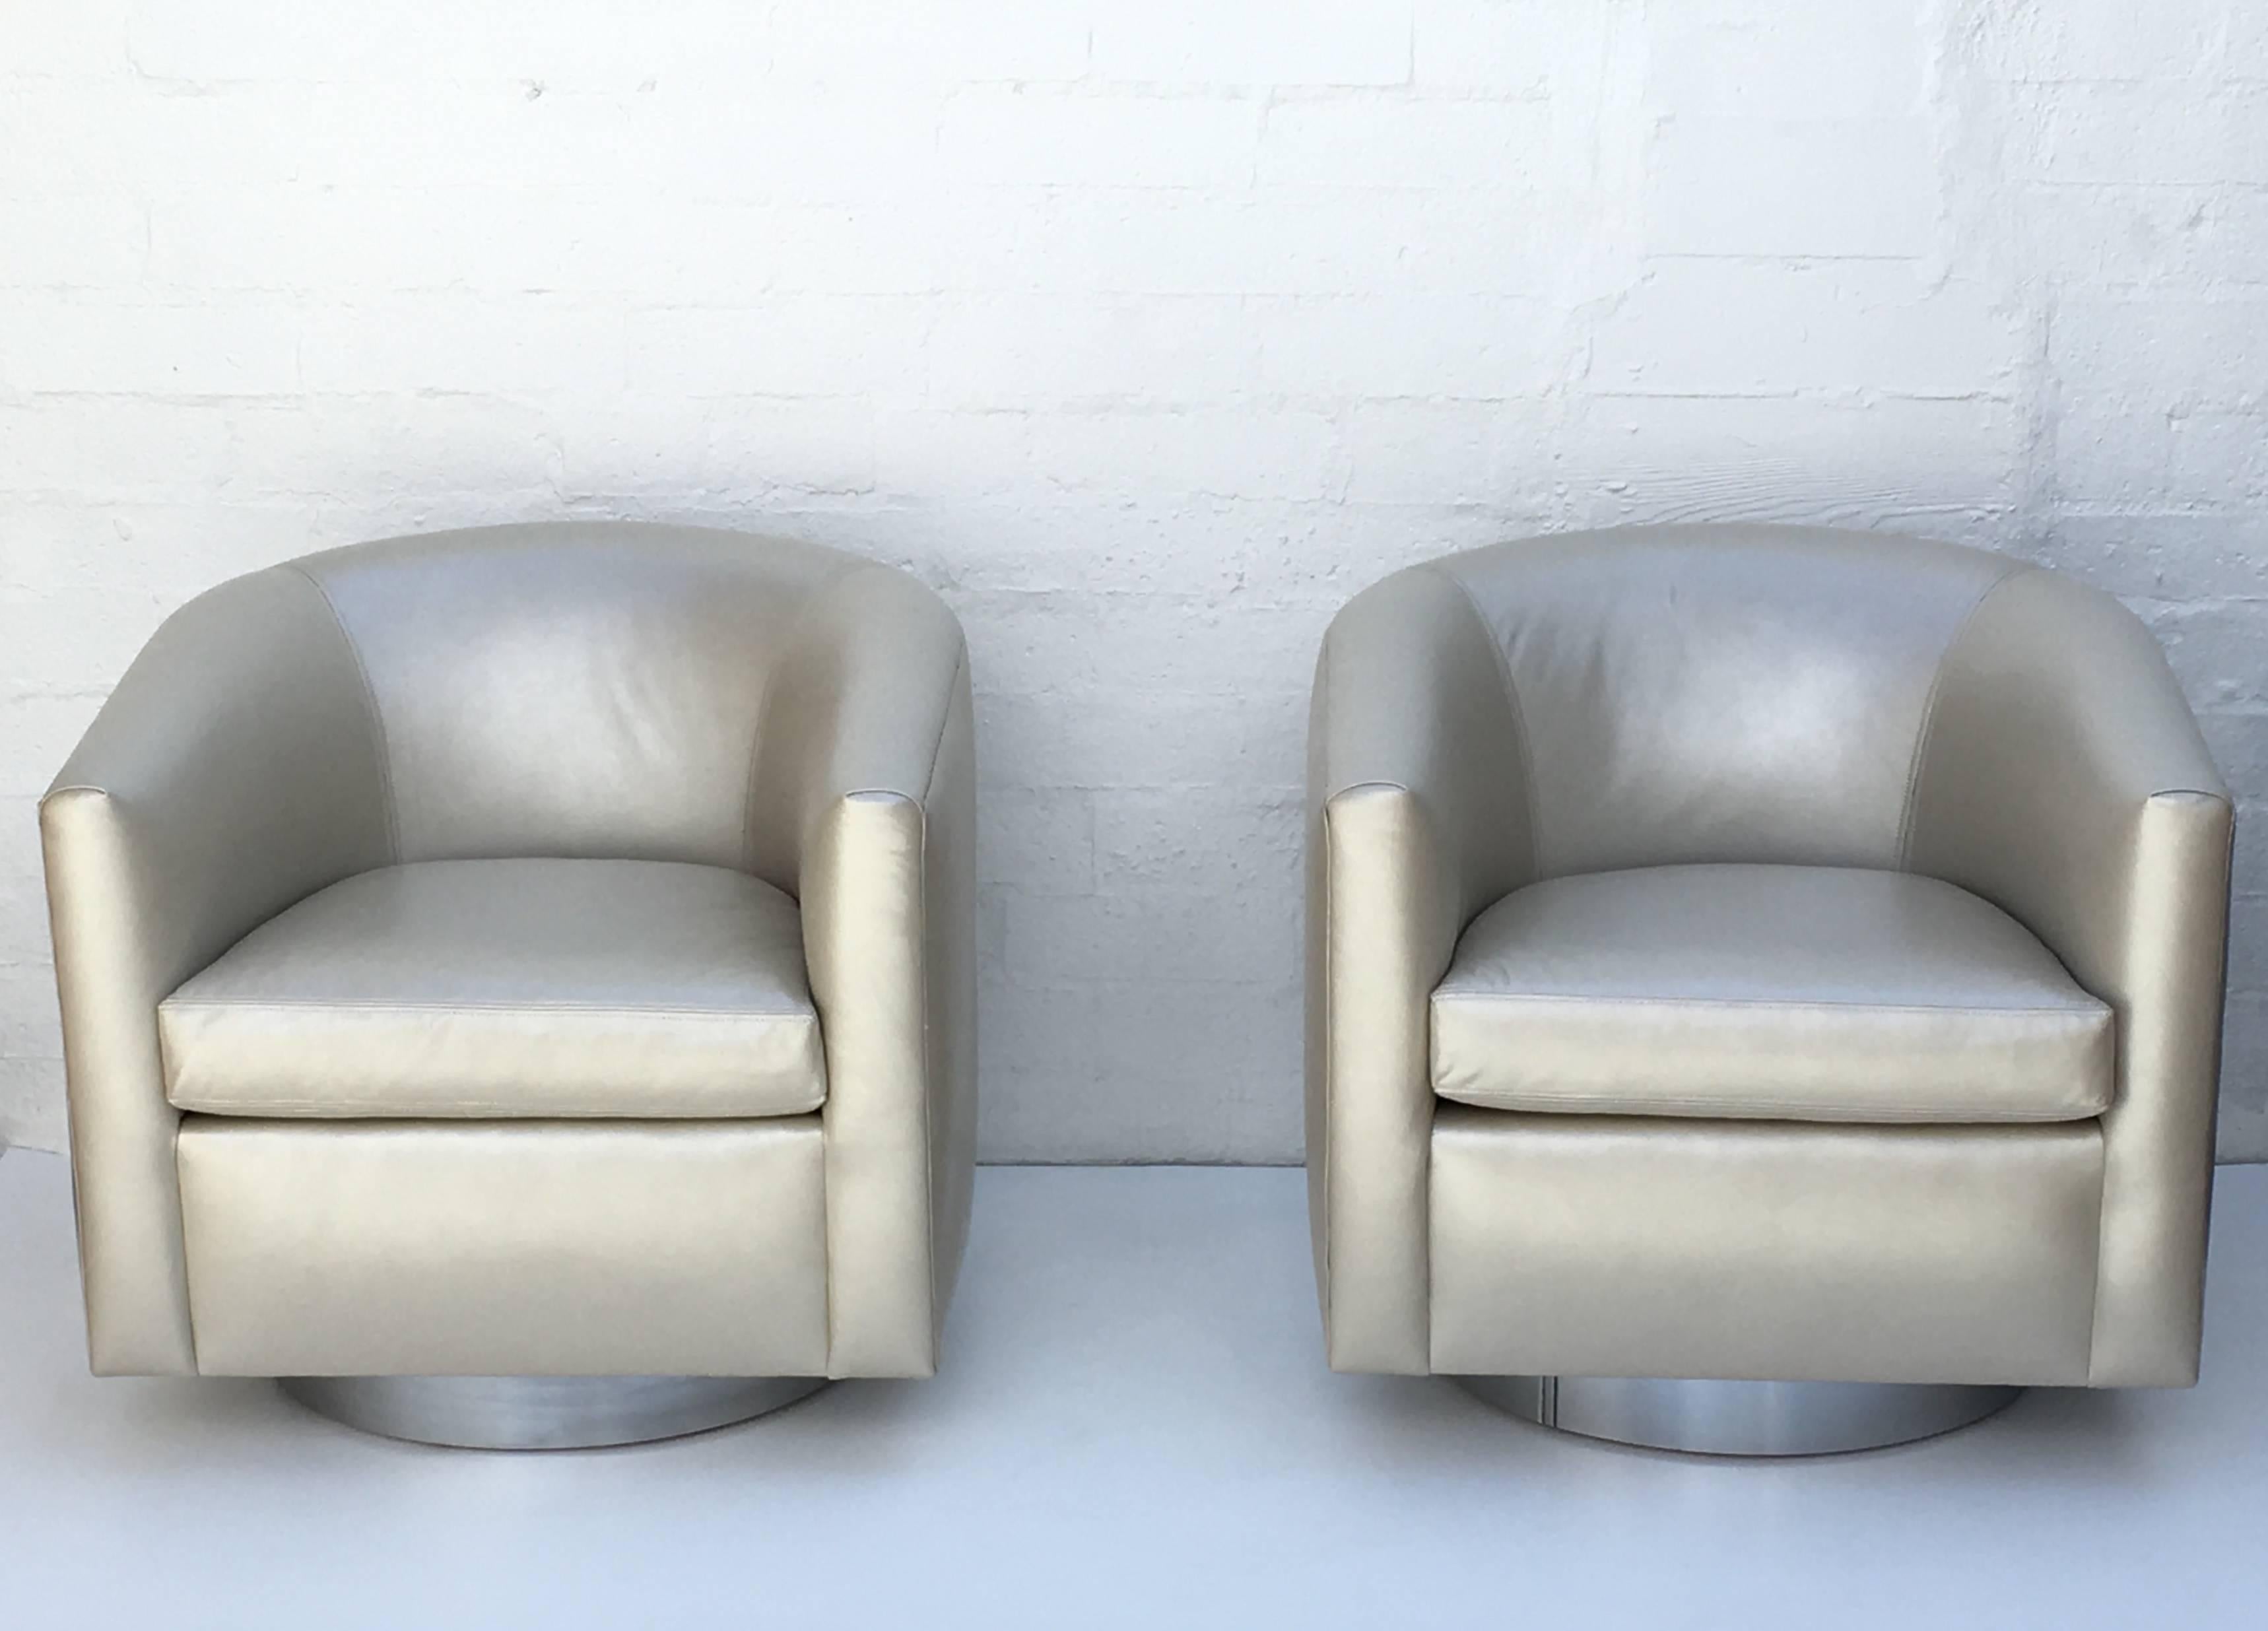 Modern Chrome and Leather Swivel Chairs by Martin Brattrud for Steve Chase